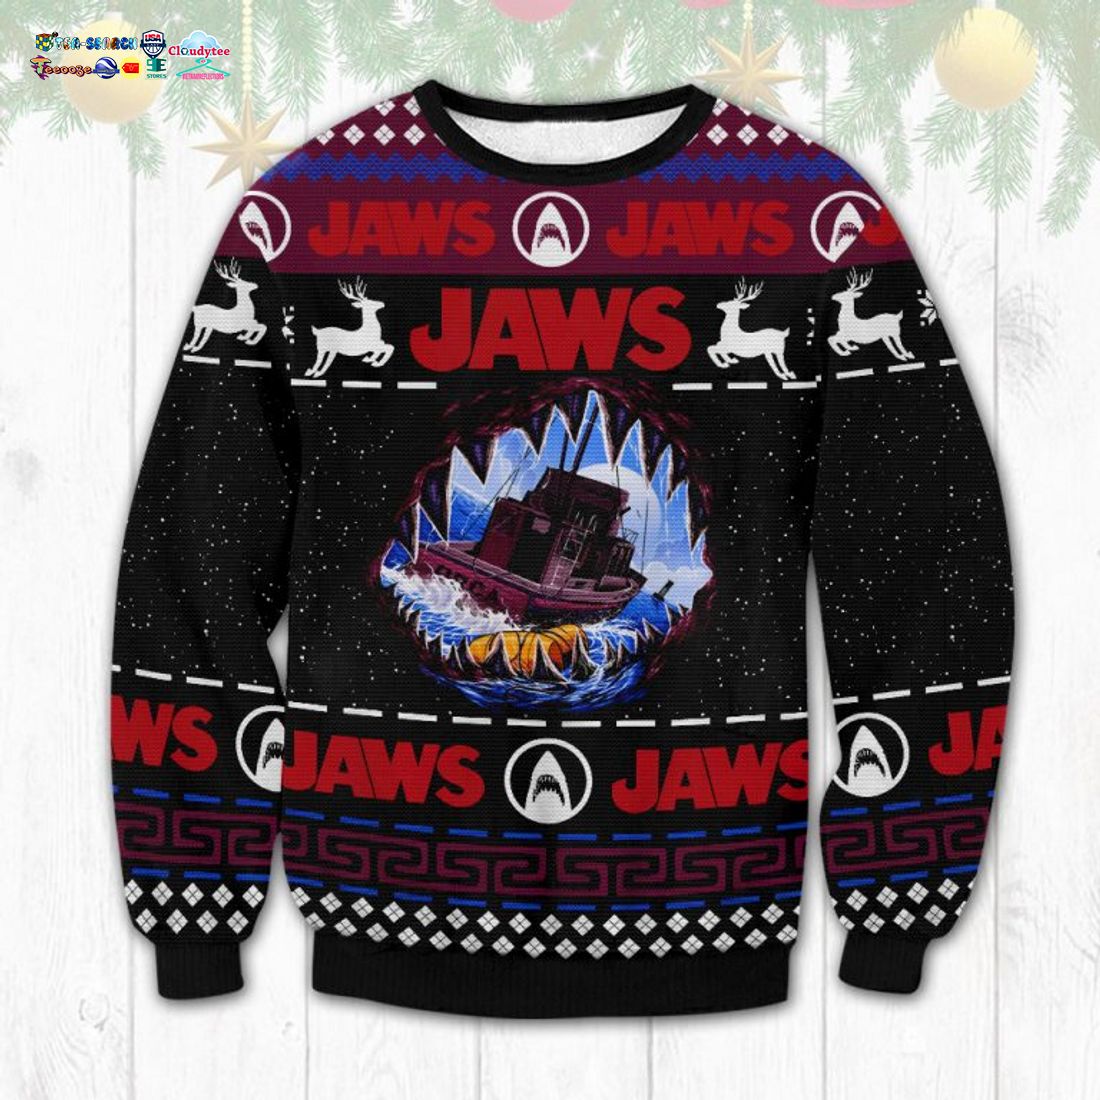 Jaws Ver 2 Ugly Christmas Sweater - Natural and awesome